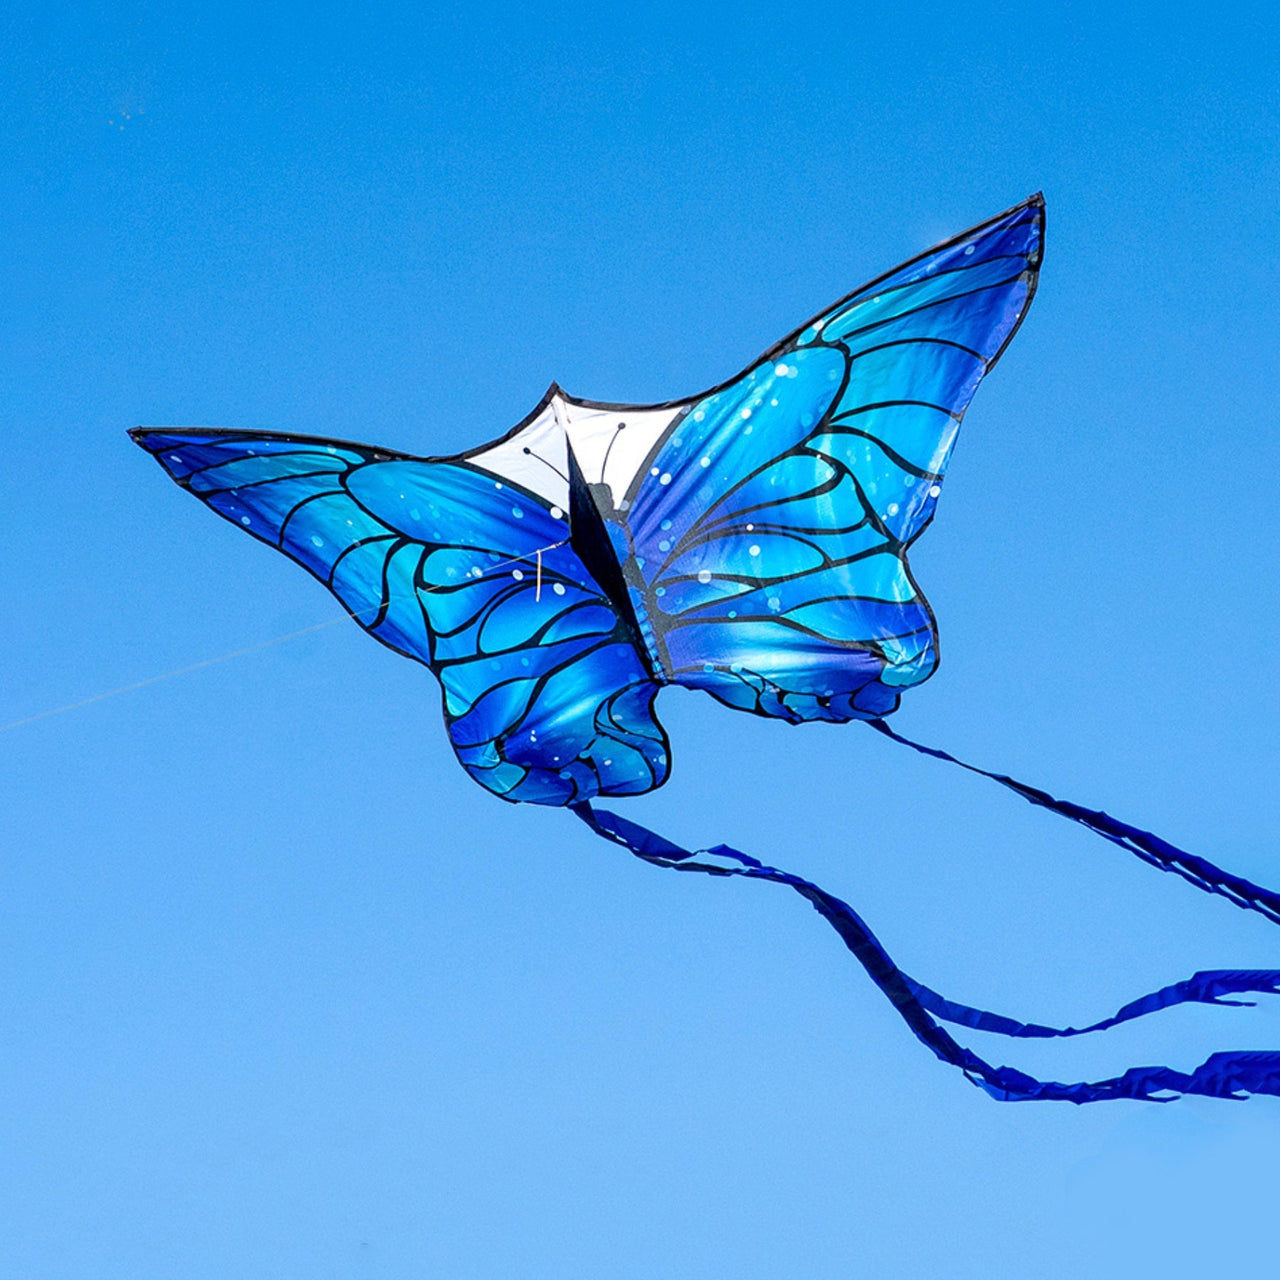 Ice Butterfly Kite